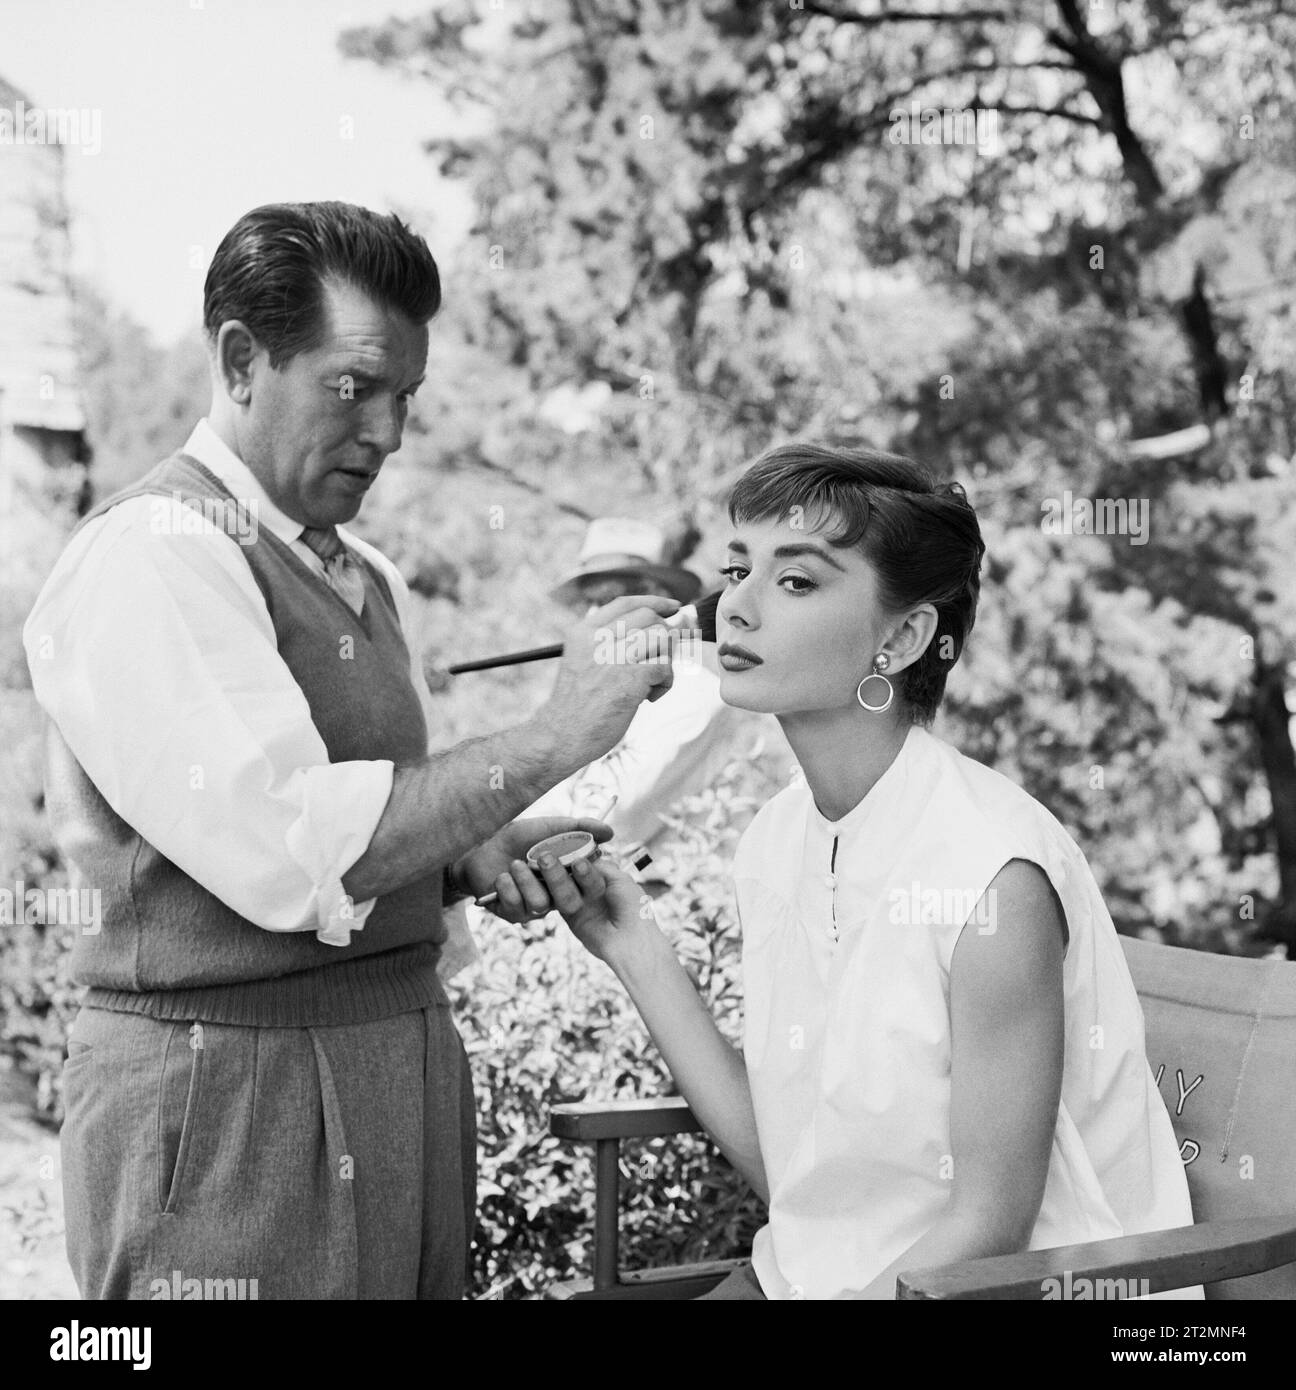 AUDREY HEPBURN in SABRINA (1954), directed by BILLY WILDER. Credit: PARAMOUNT PICTURES / Album Stock Photo